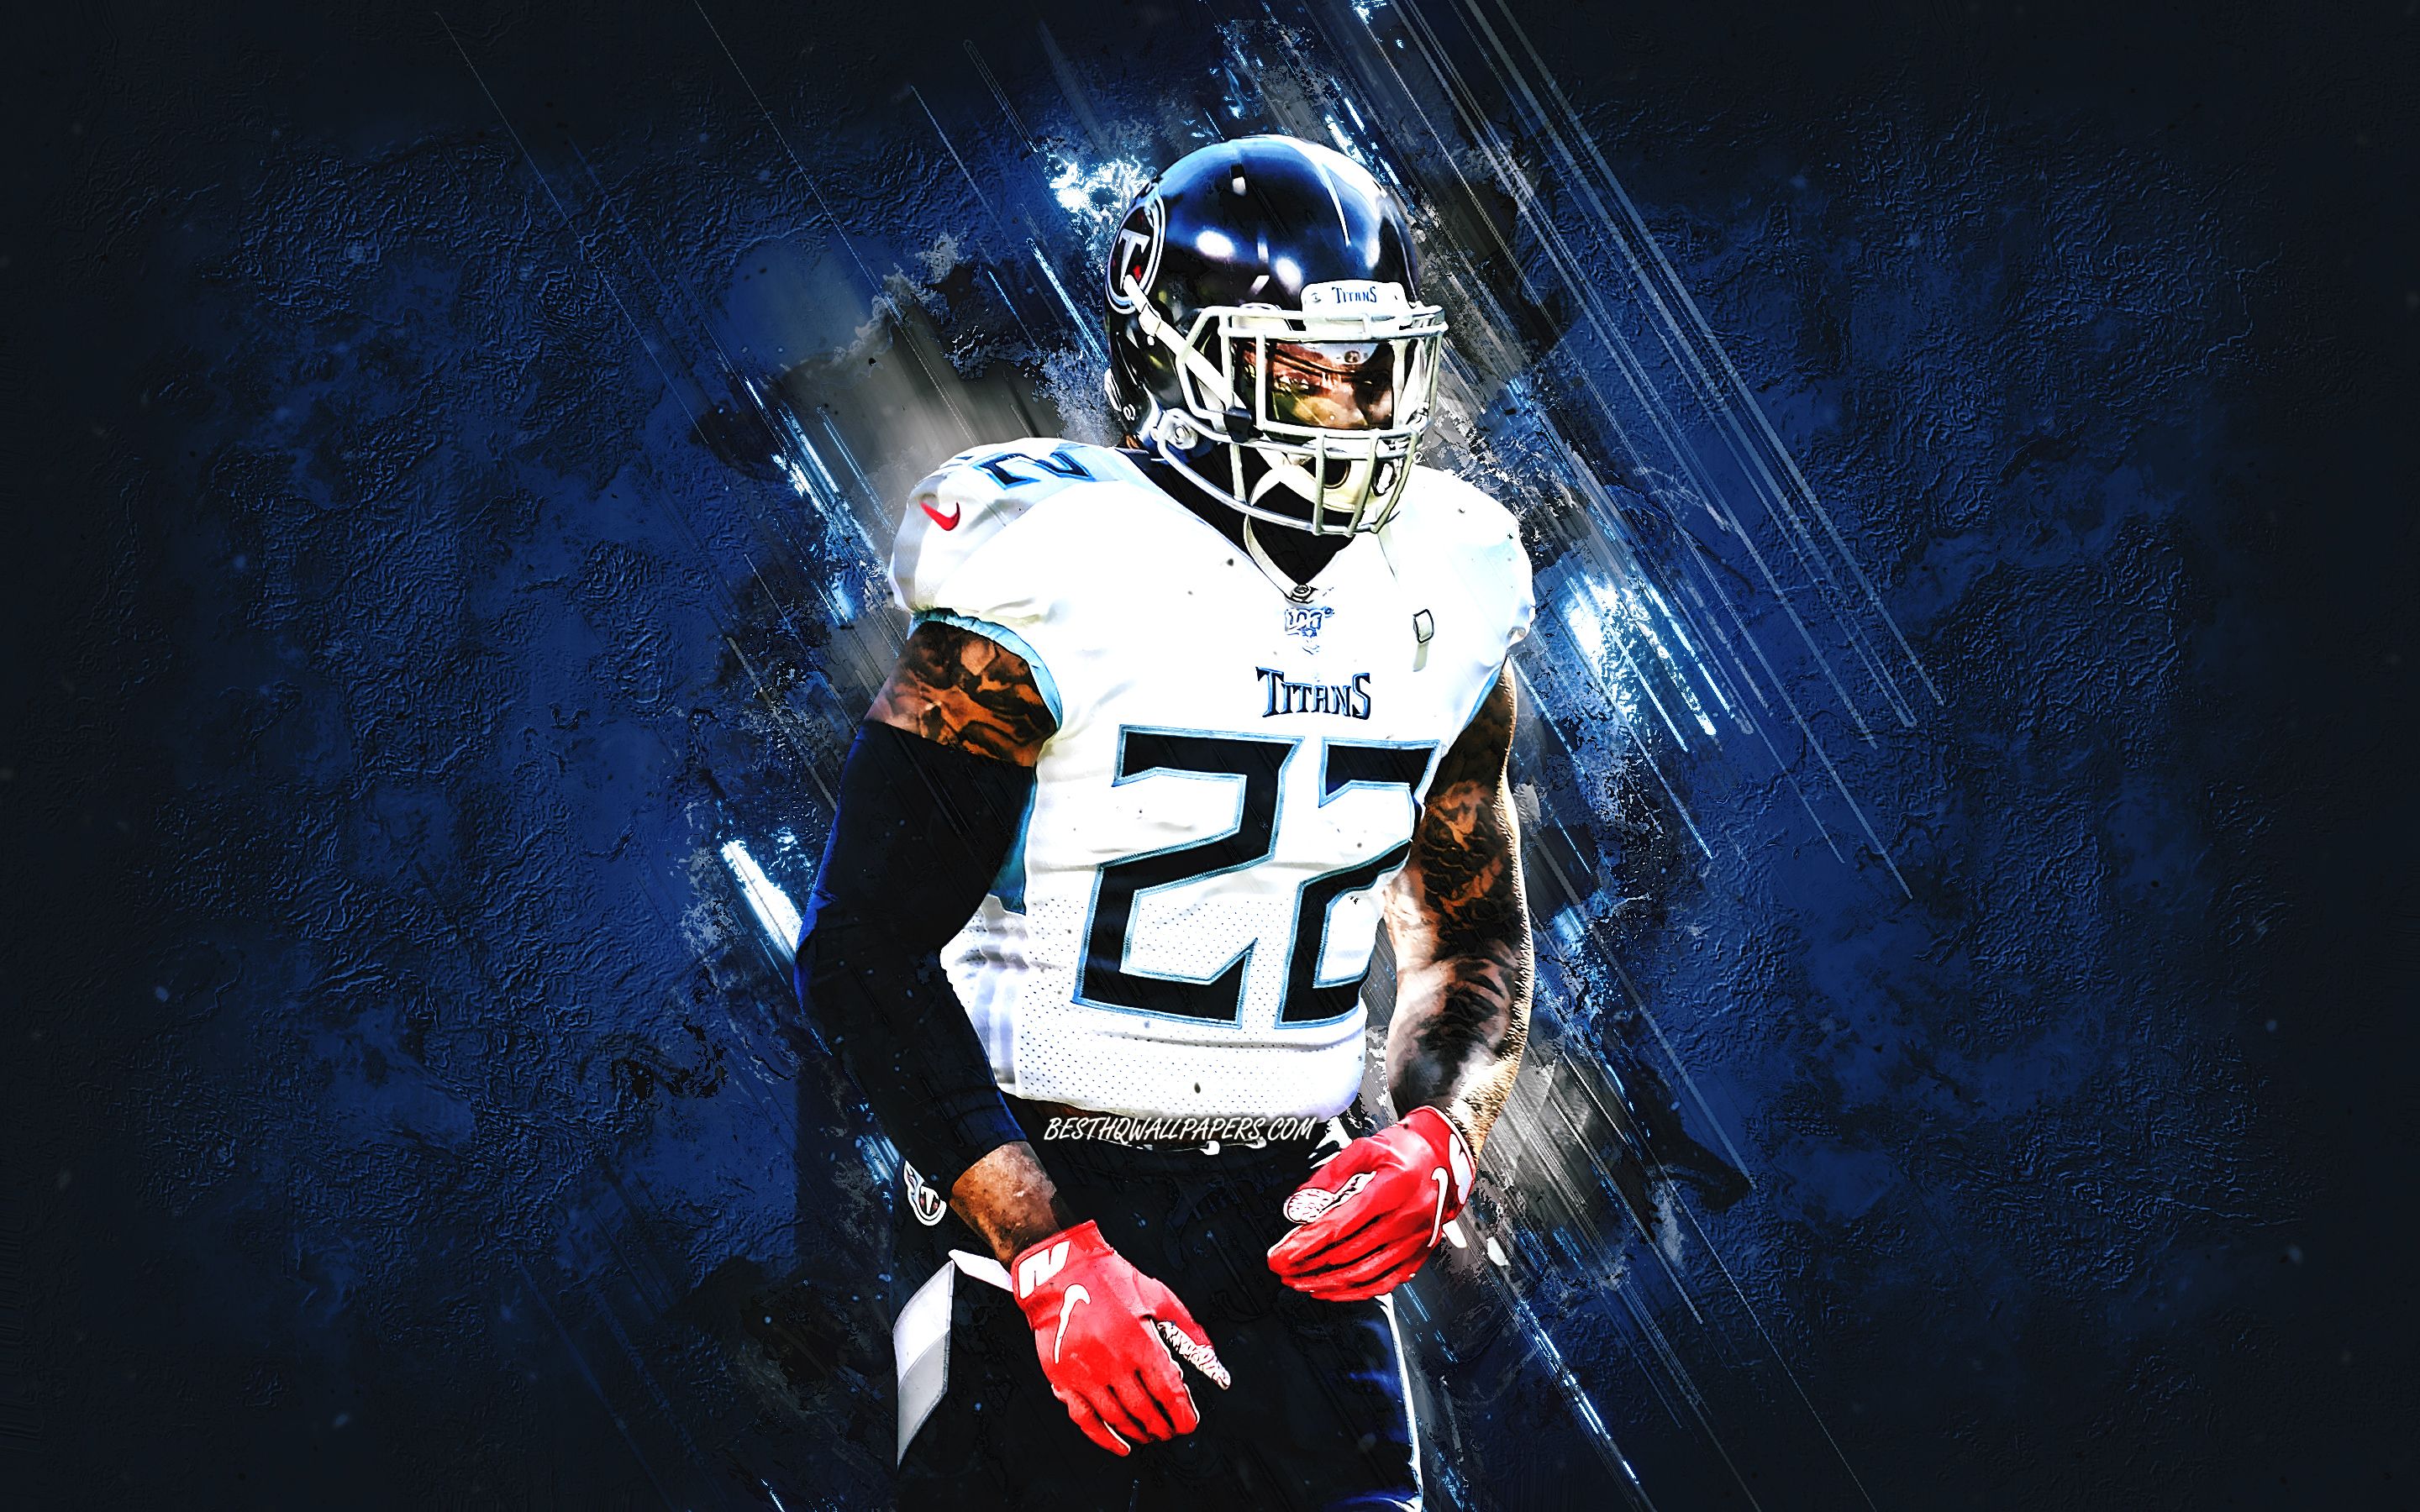 Download wallpapers Derrick Henry, Tennessee Titans, NFL, American football, blue sto...